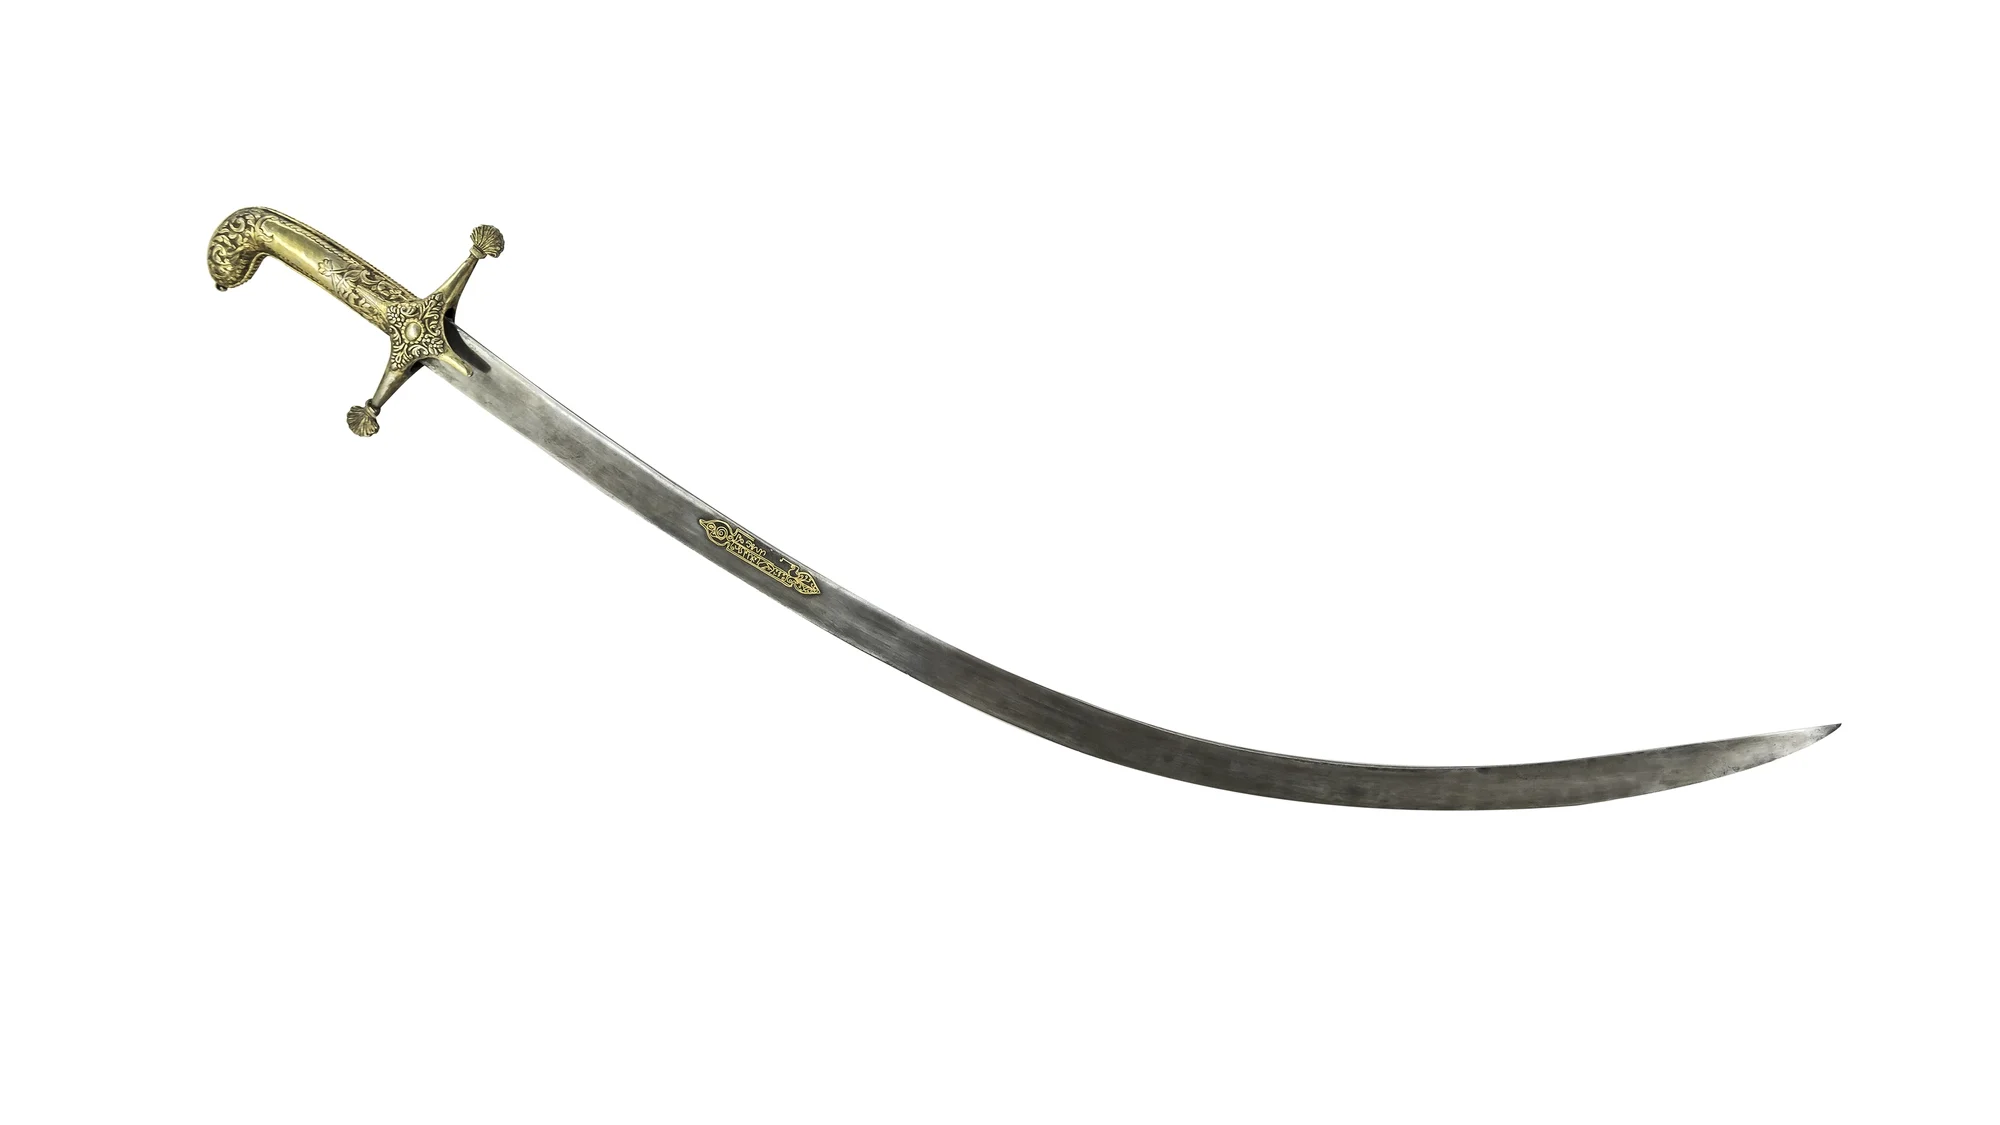 Close-up of a sabre sword with a curved blade and ornate handle, isolated on a white background.